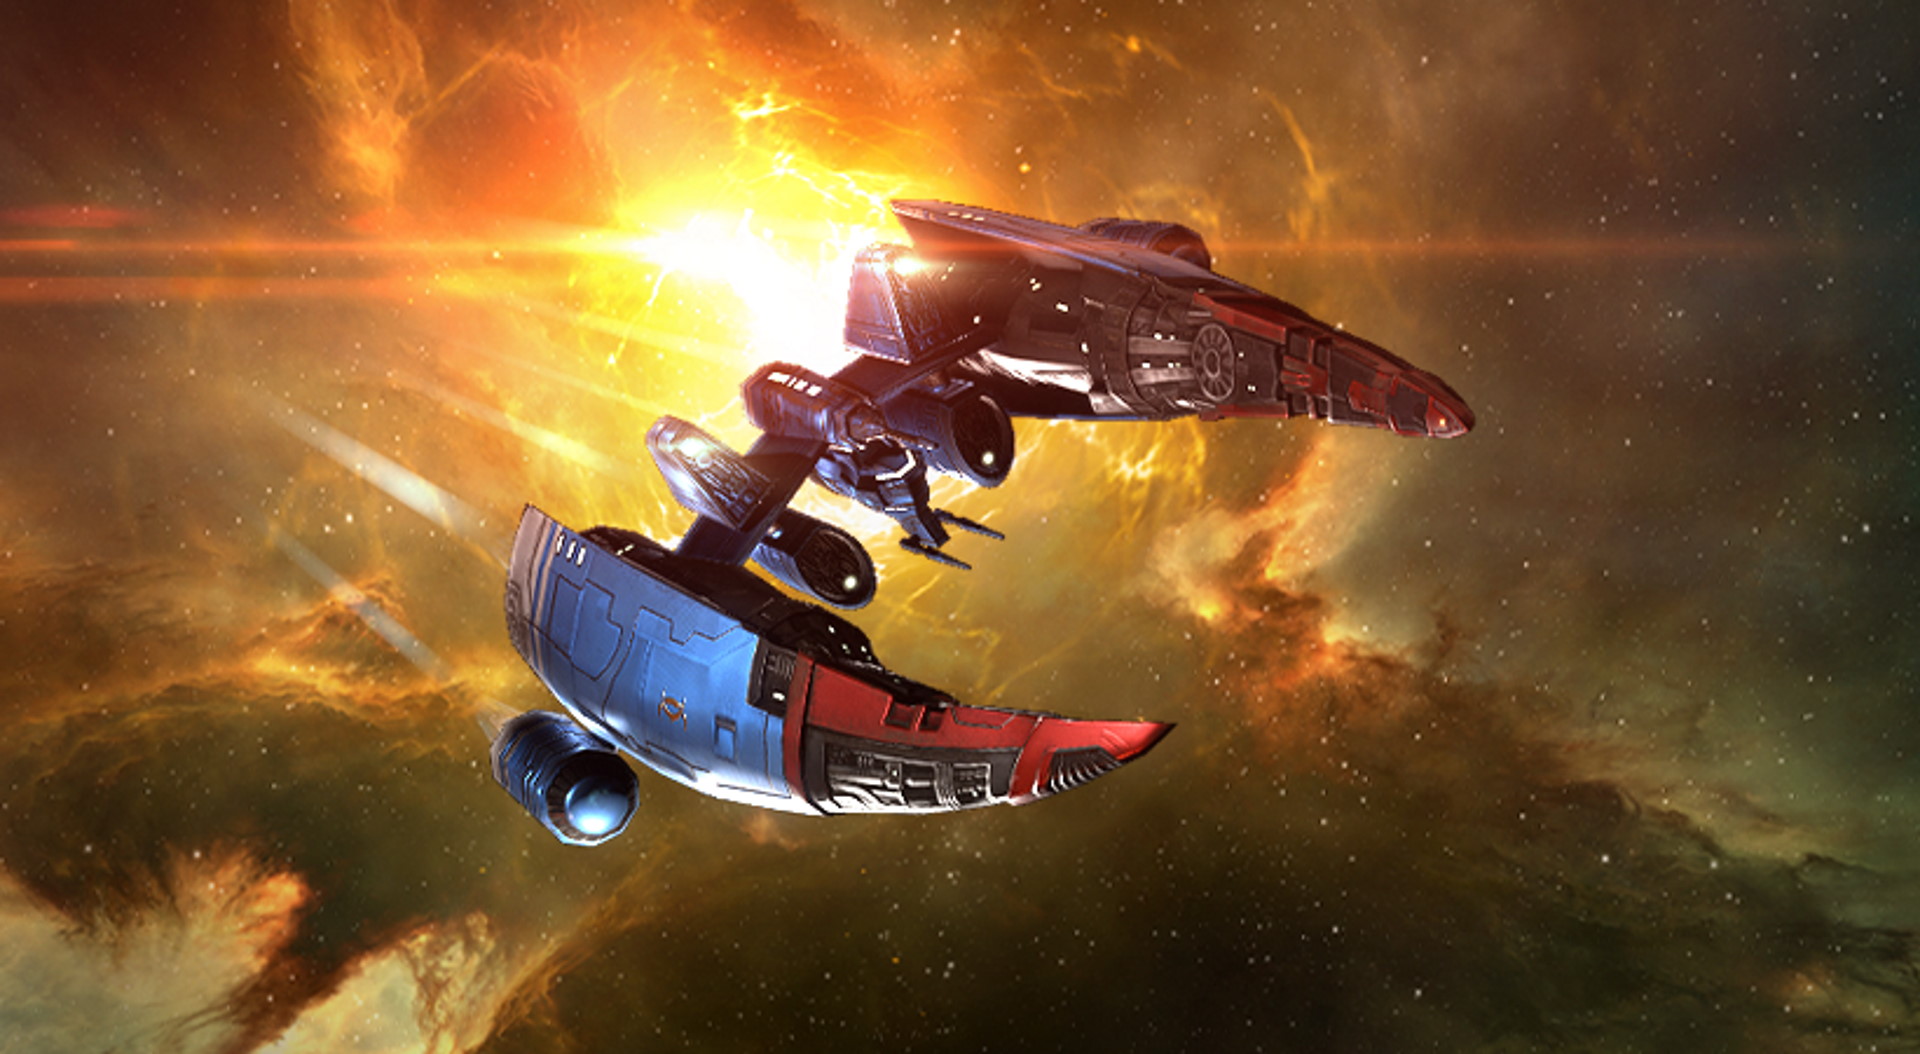  EVE Online blows up an entire star and everyone around it to kick off a new inter-faction war 